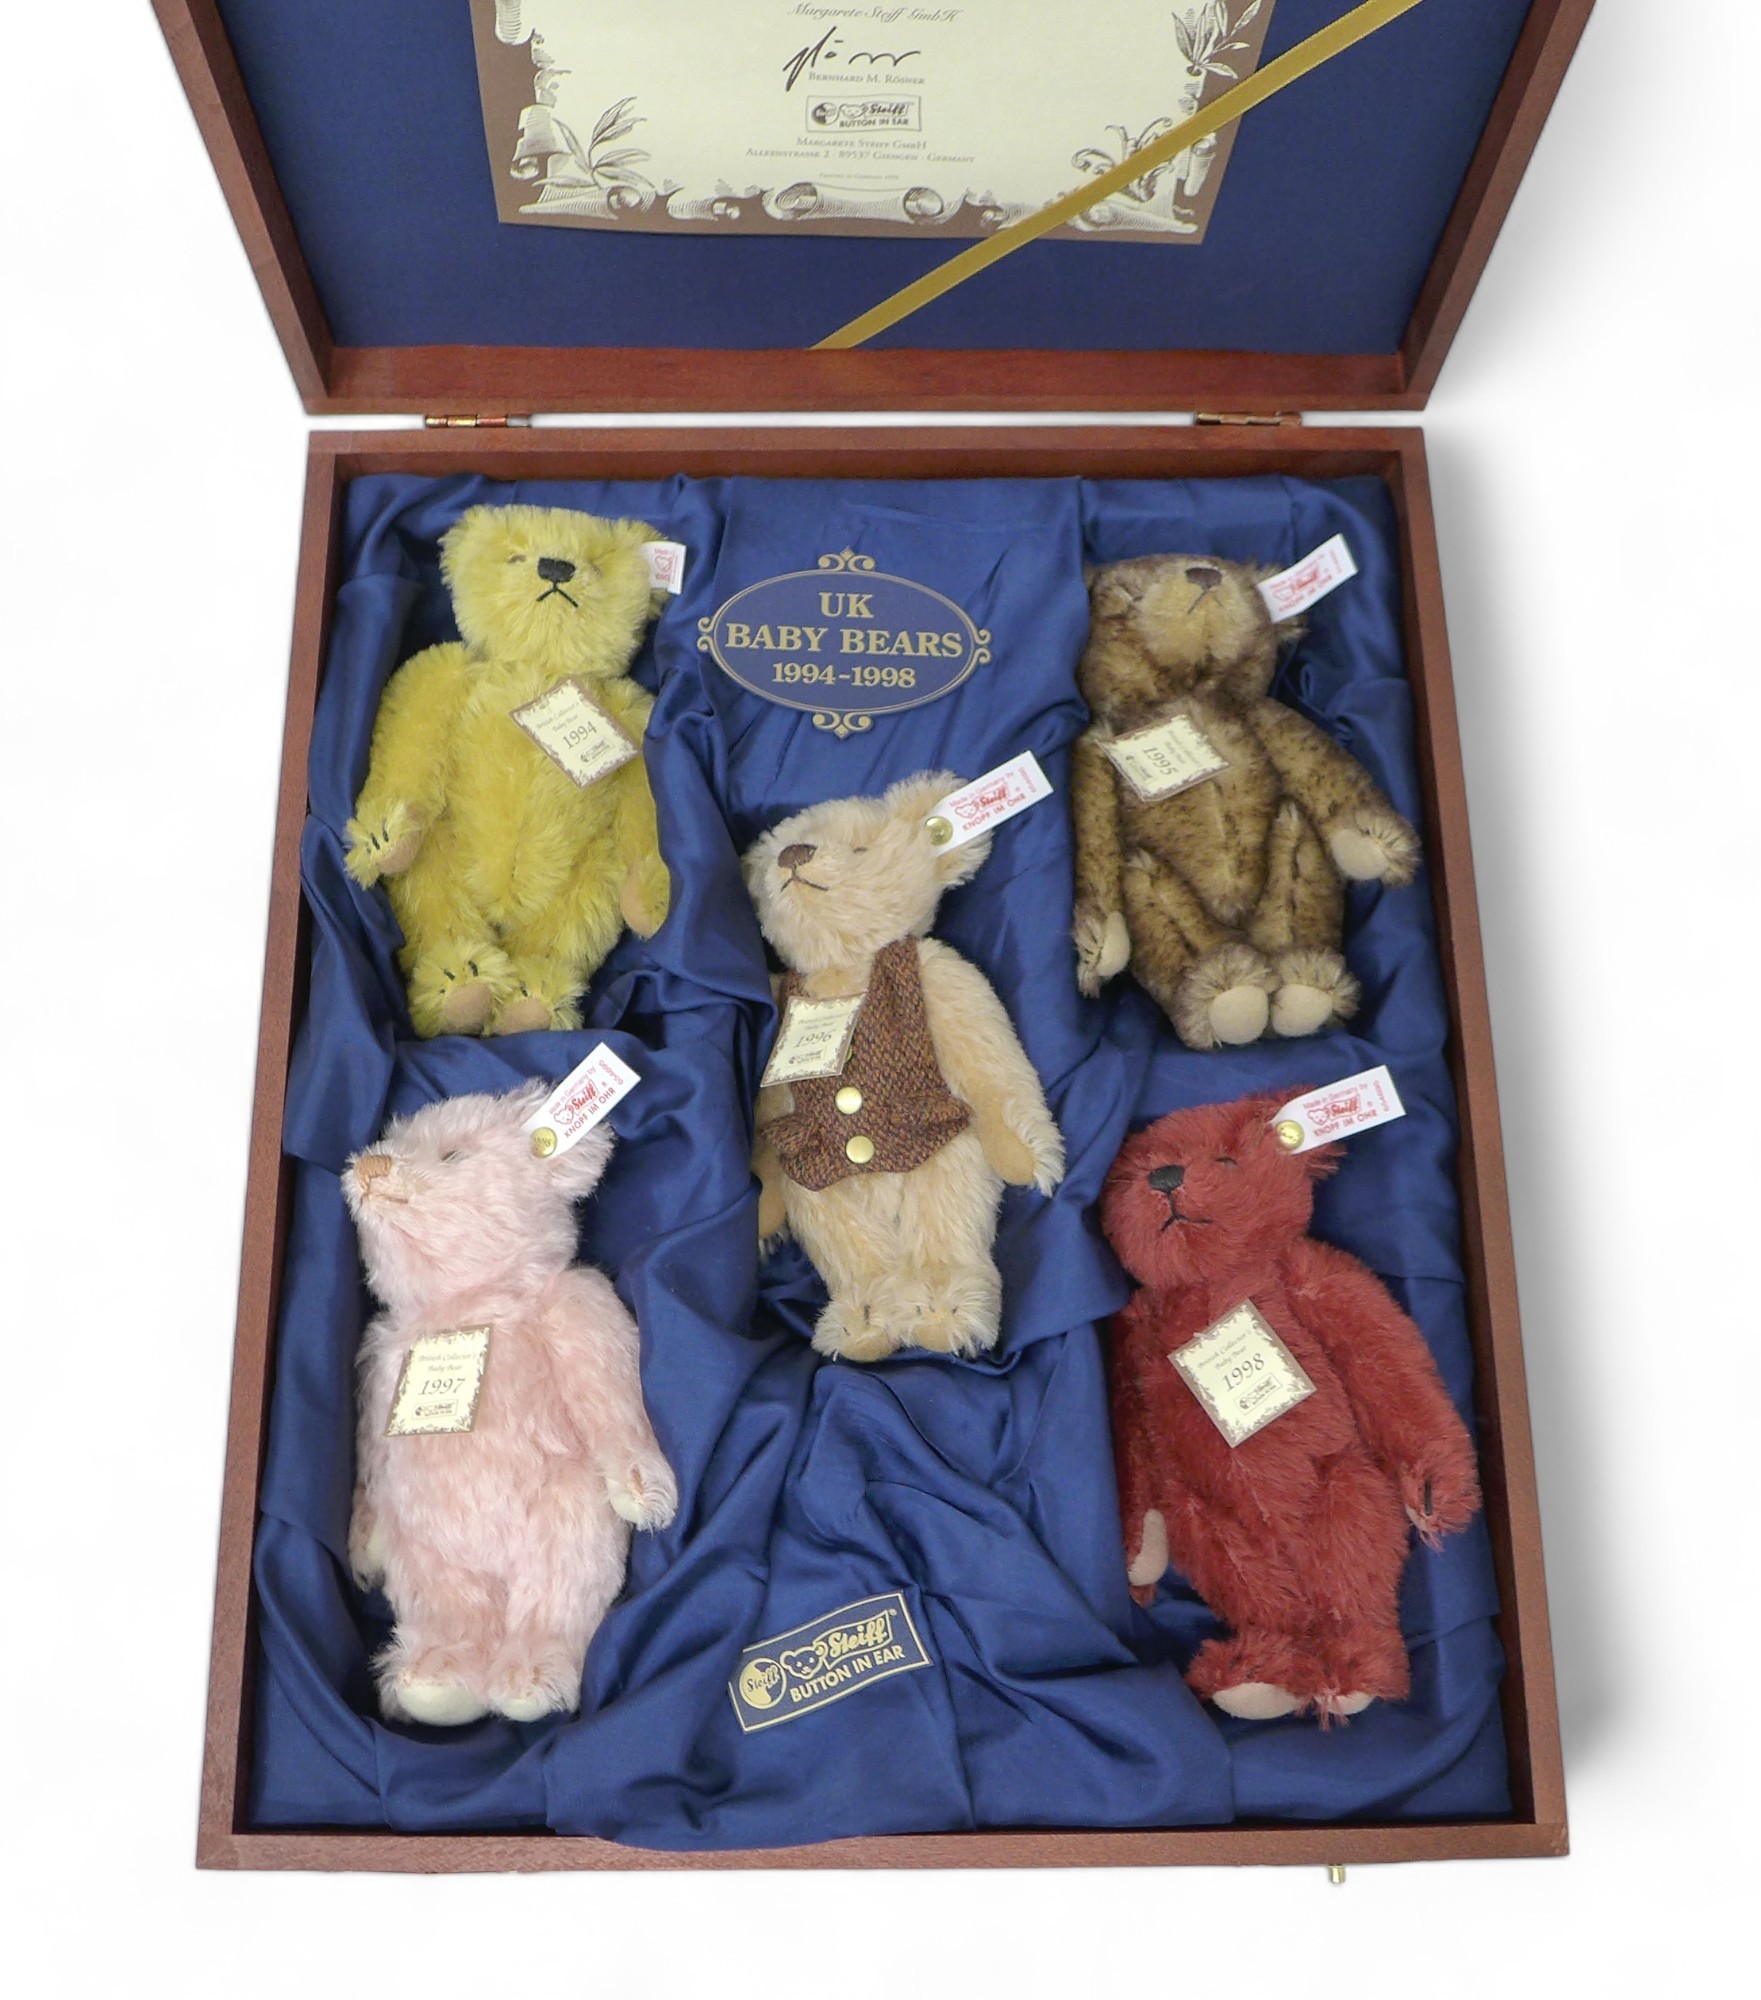 Steiff British Collectors Baby Bears 1994 - 1998 in presentation wooden box. Five 16cm bears with - Image 4 of 9